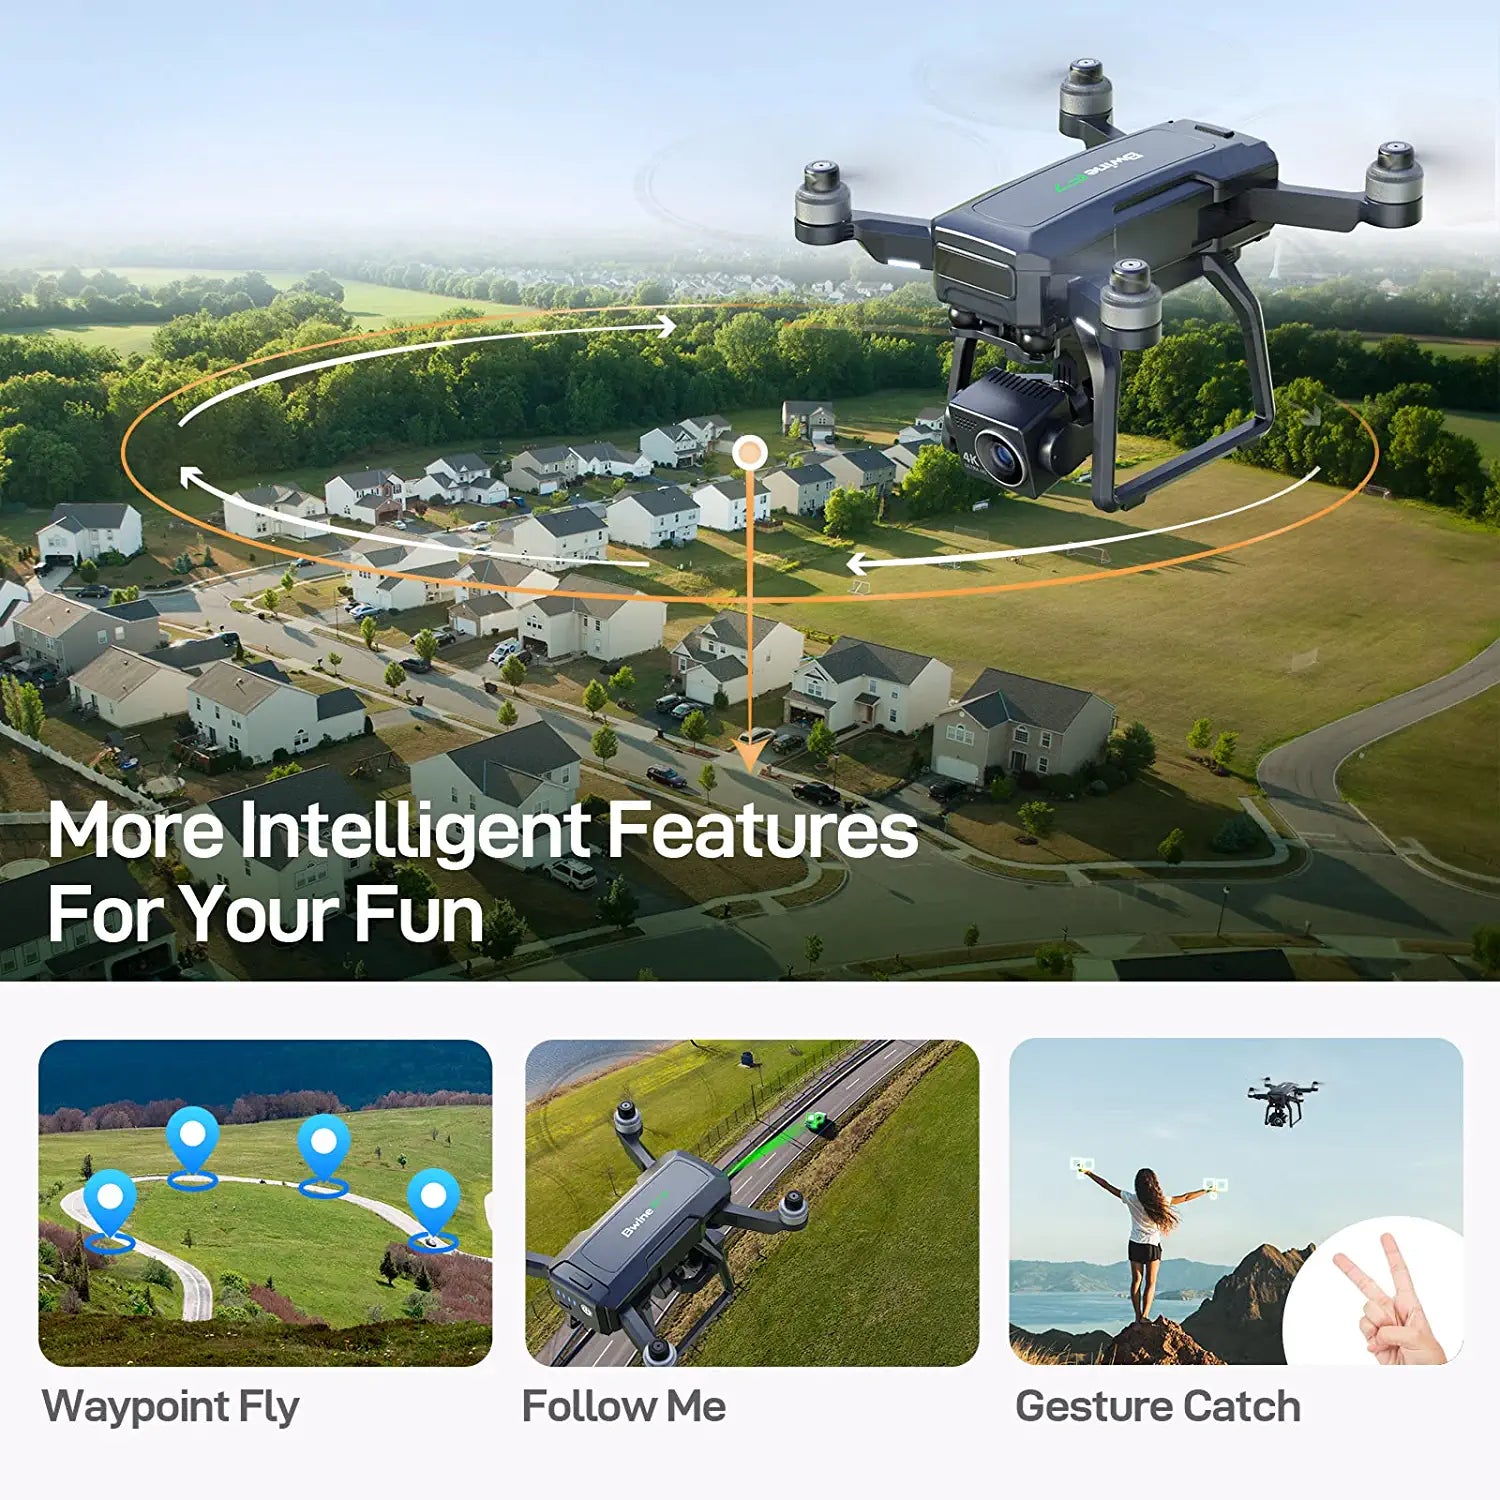 Bwine F7 Drone - with Camera for Adults 4K, 9800ft Video Transmission, Camera Drone with 3-Axis Gimbal, GPS Auto Return, Follow Me, Waypoints, Level 6 Wind Resistance, 2 Batteries for 50 Min Flight Time Professional Camera Drone - RCDrone